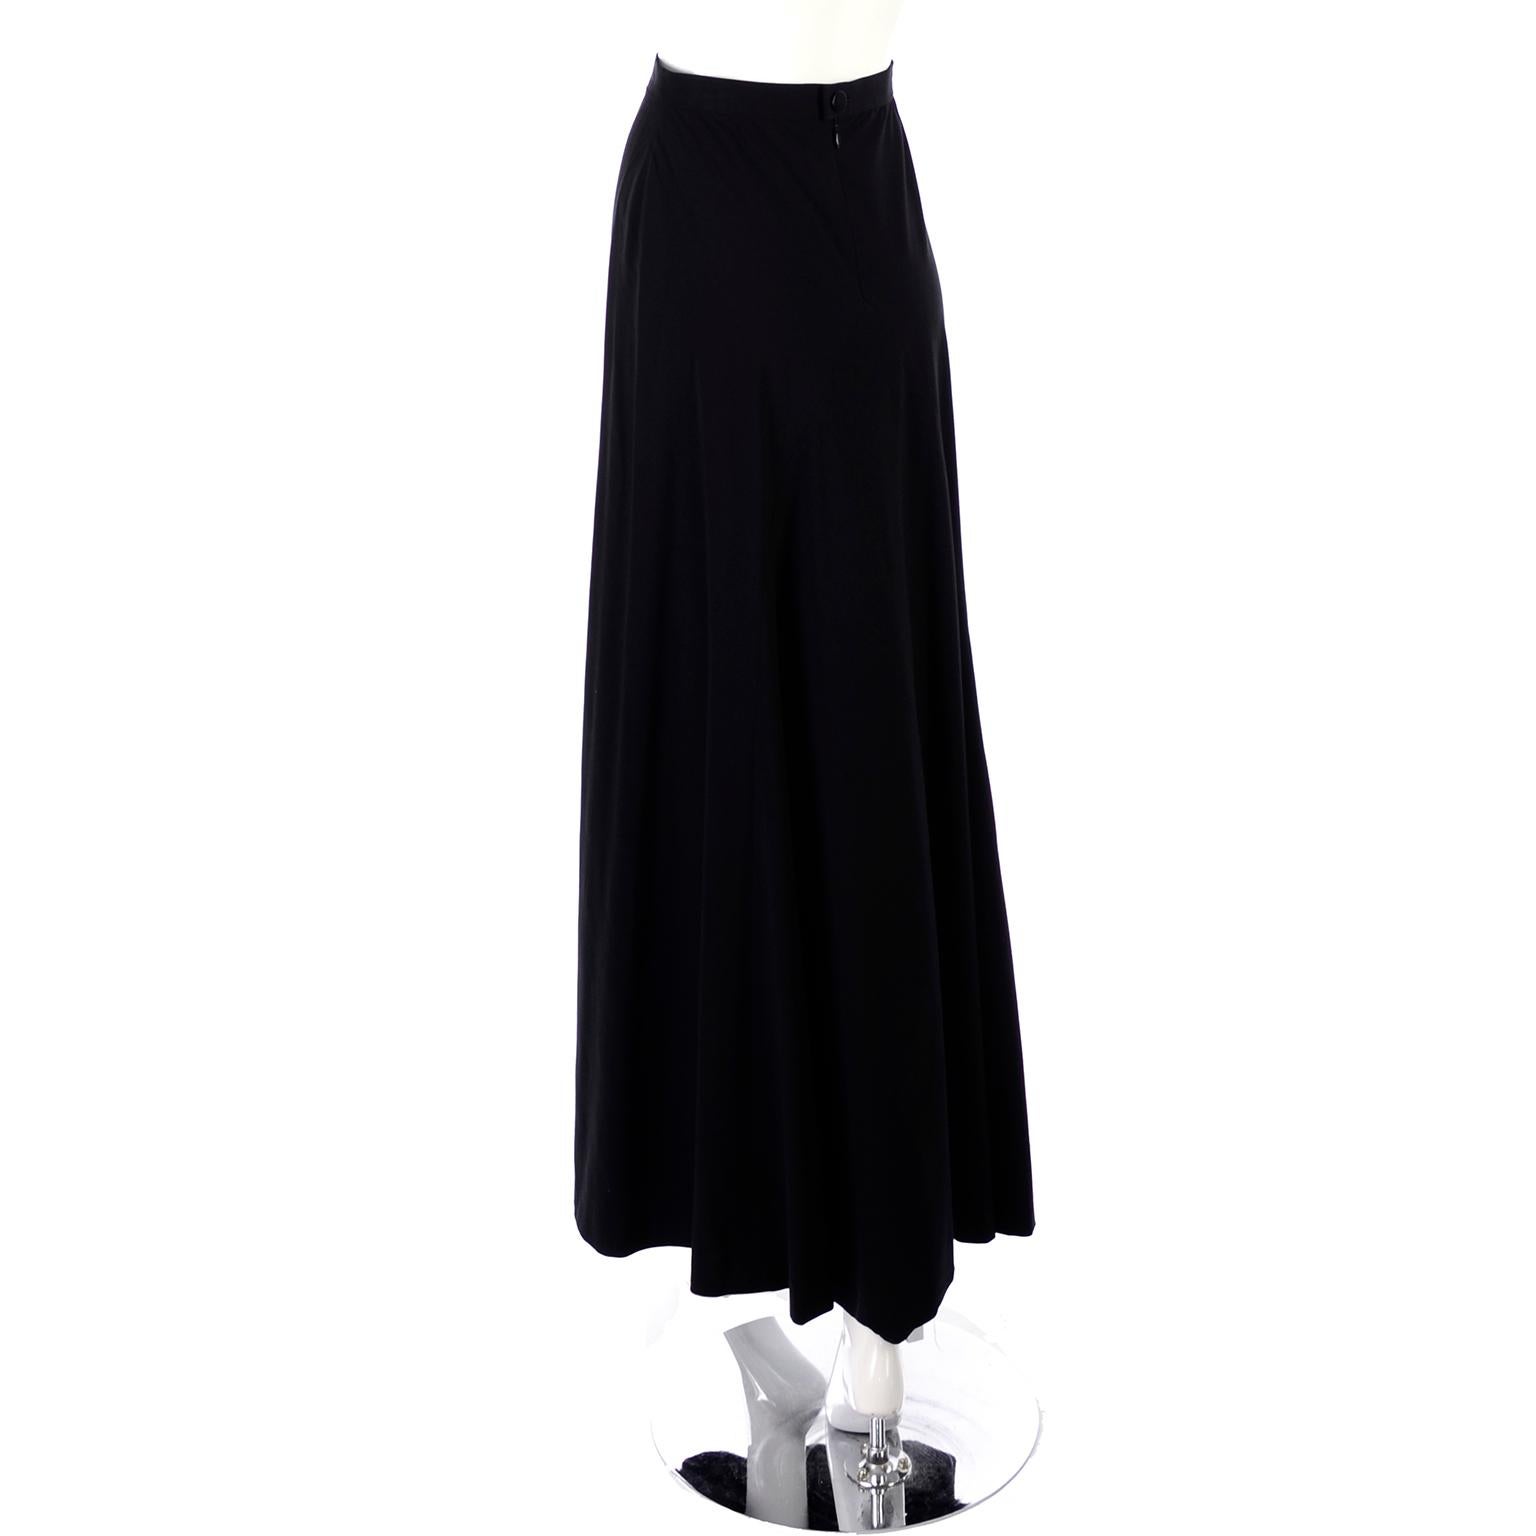 1999 Vintage Chanel Boutique Black Long Full Length Skirt Size 36 In Excellent Condition For Sale In Portland, OR